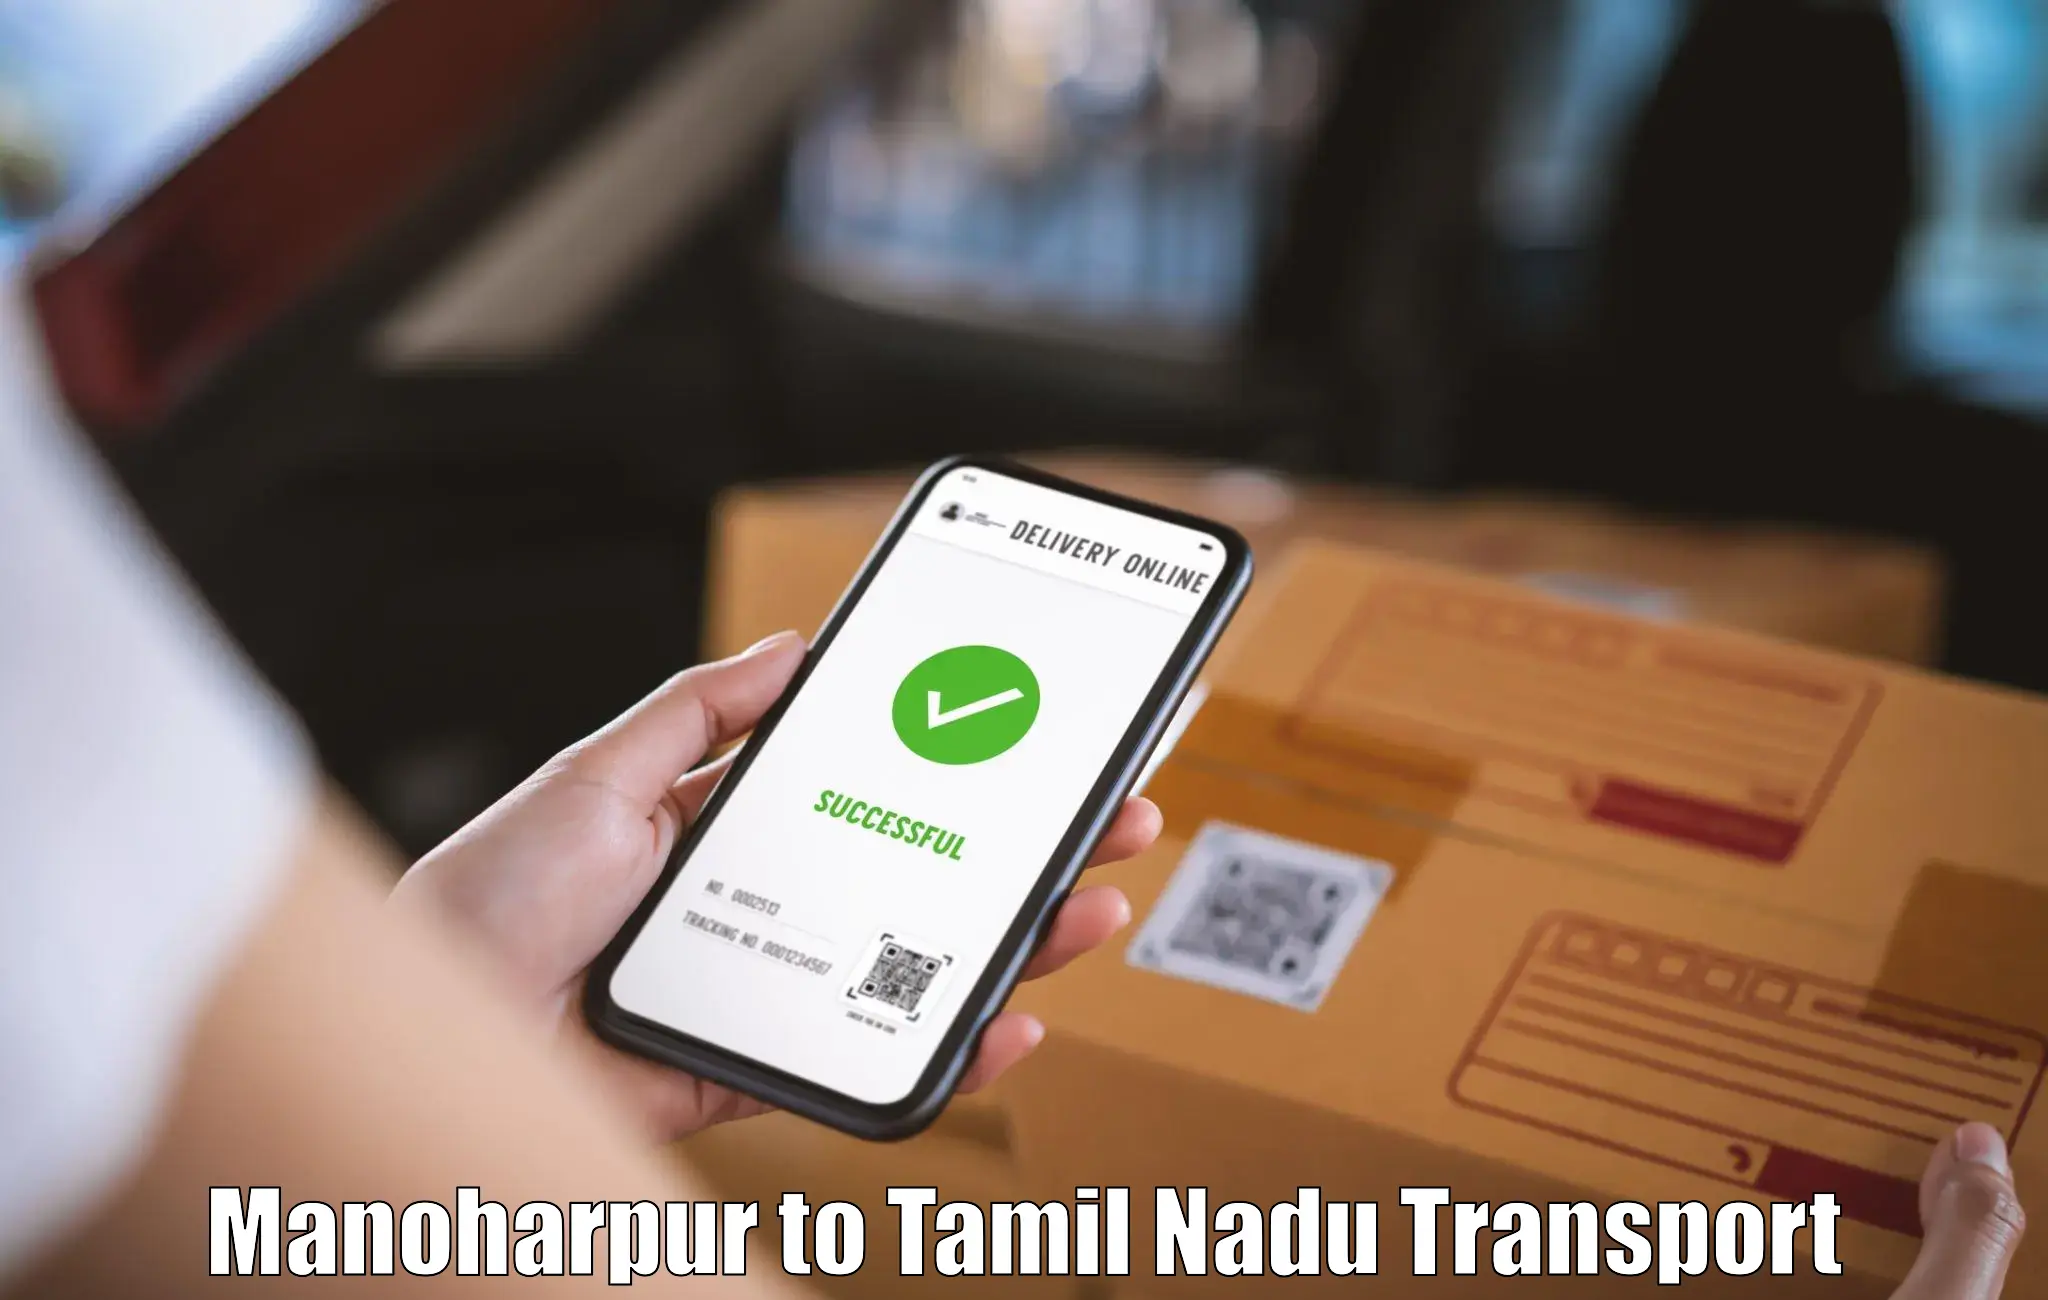 Commercial transport service Manoharpur to Muthukulathur